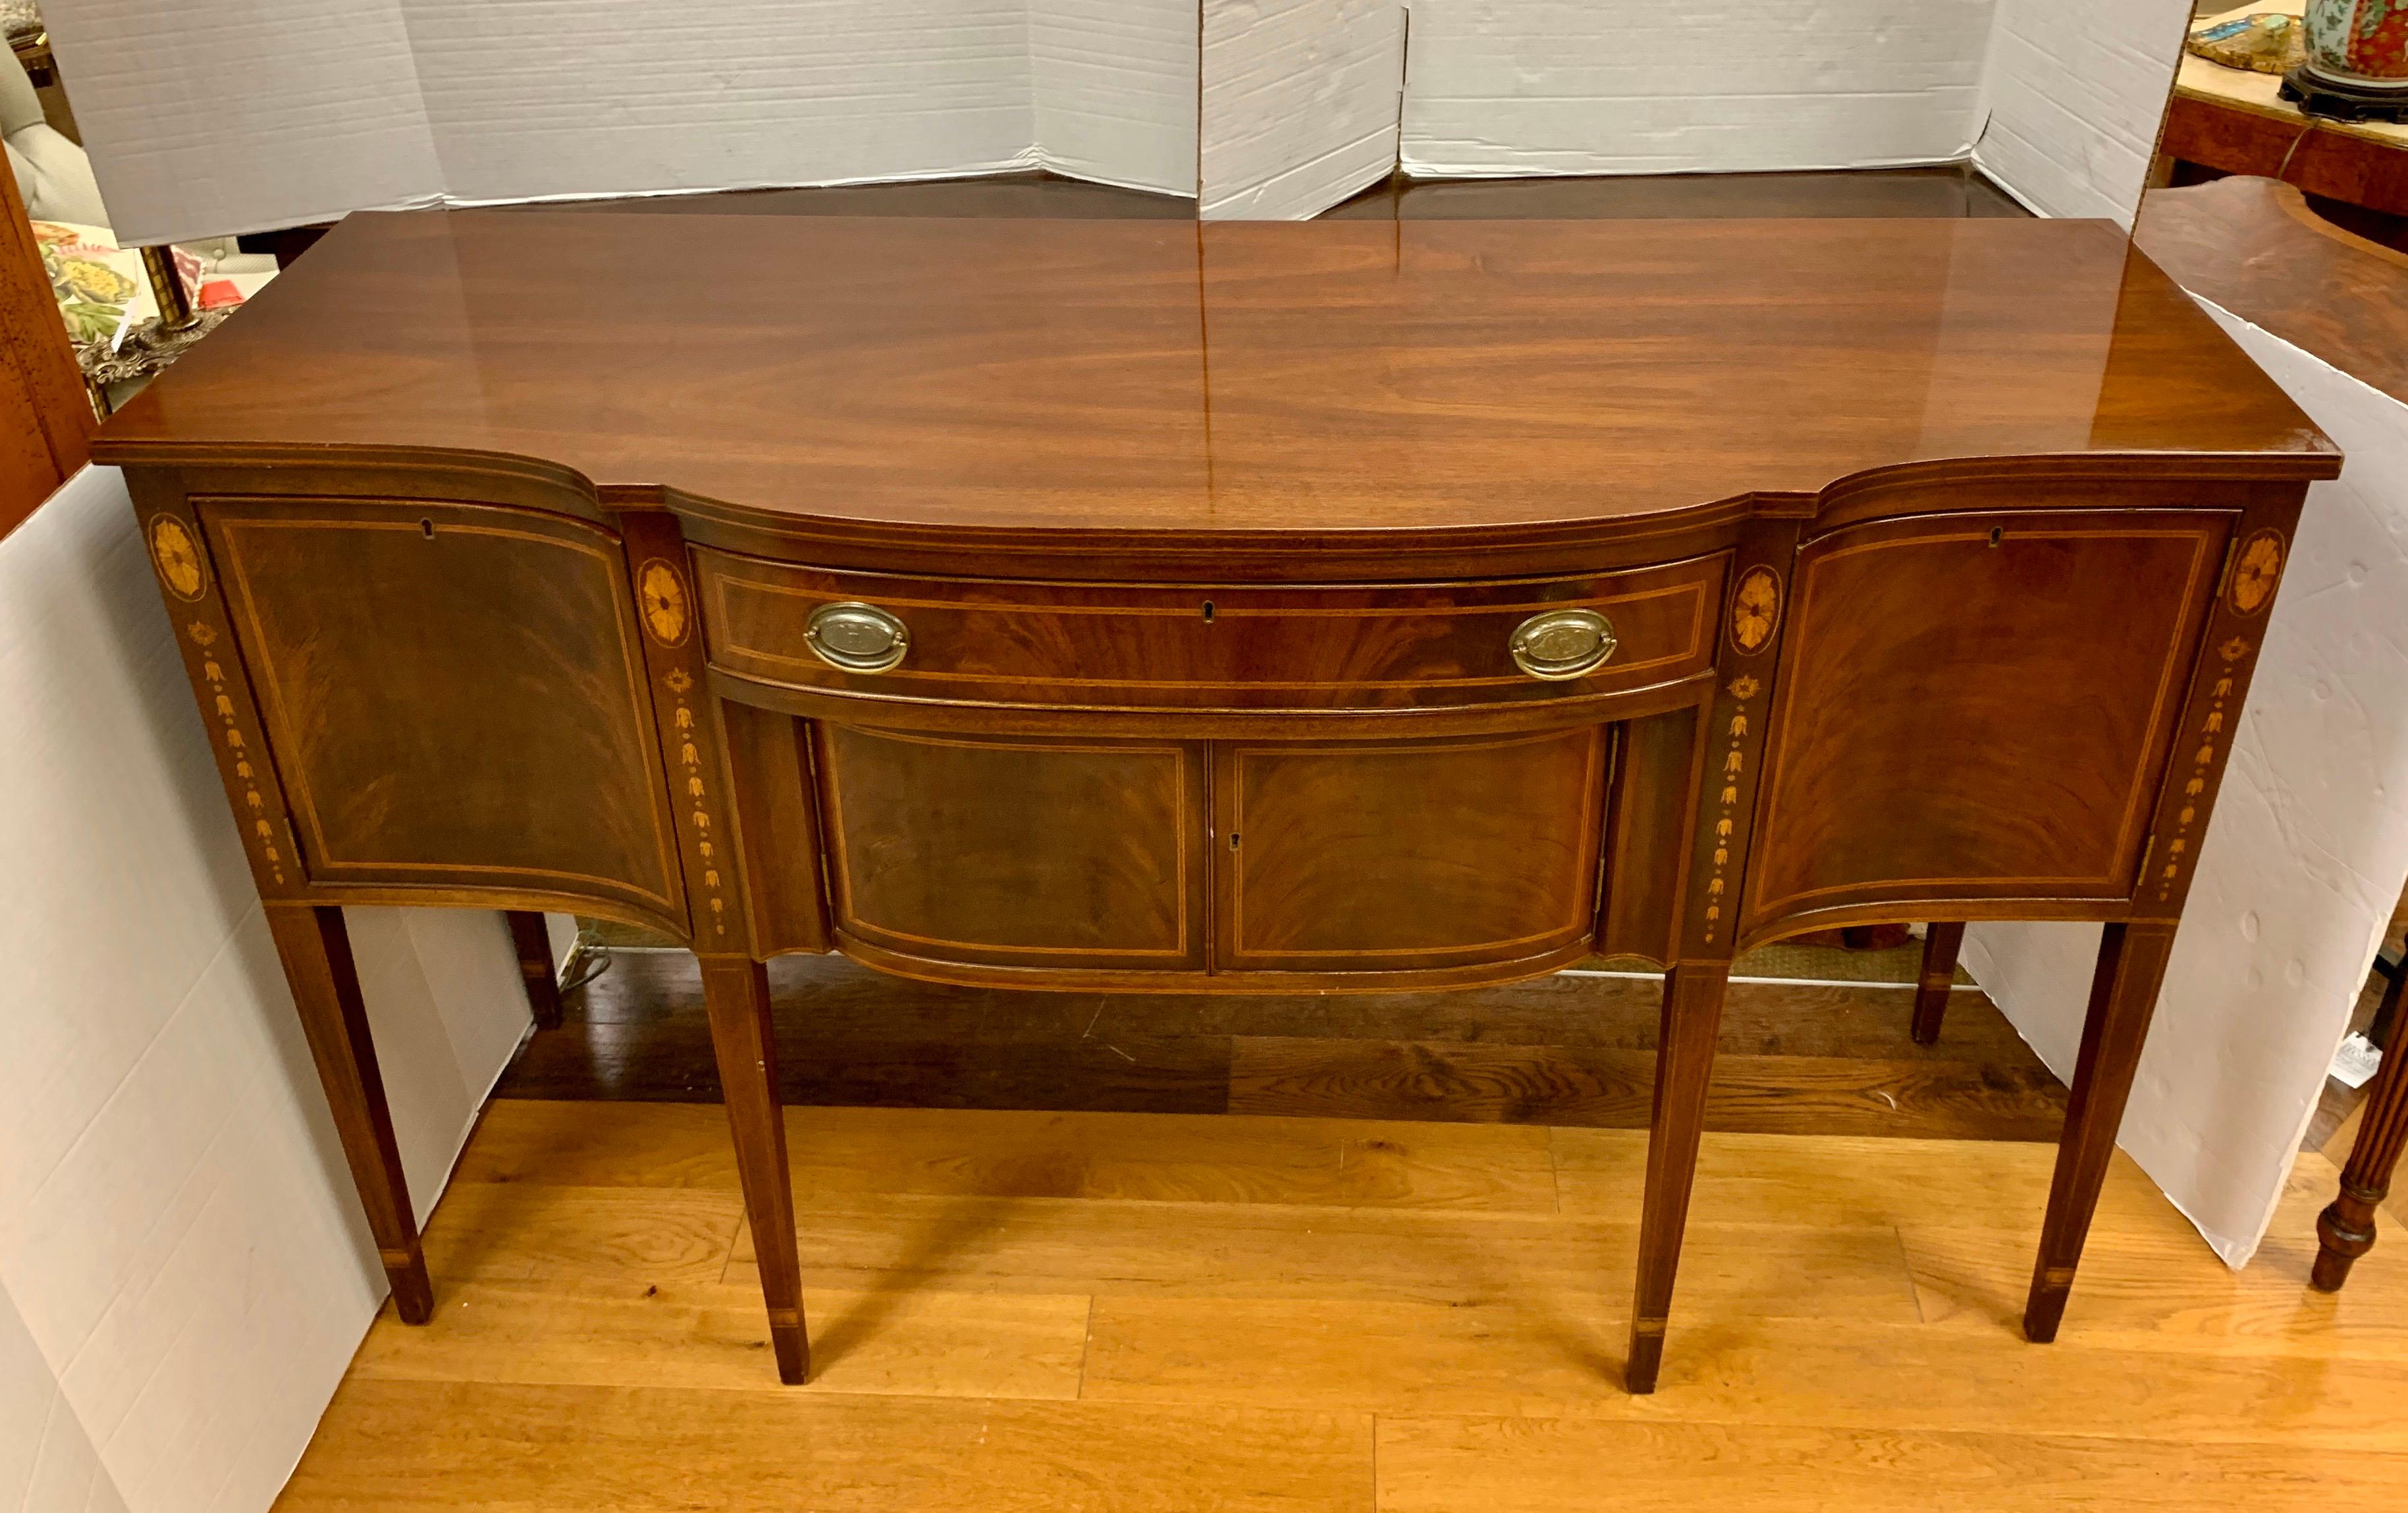 Outstanding large Sheraton bow front Kittinger sideboard constructed of solid mahogany and mahogany veneer. The matched flame mahogany veneer is highlighted with boxwood inlay and has beautiful bellflower inlay down the tapered legs. Brass American